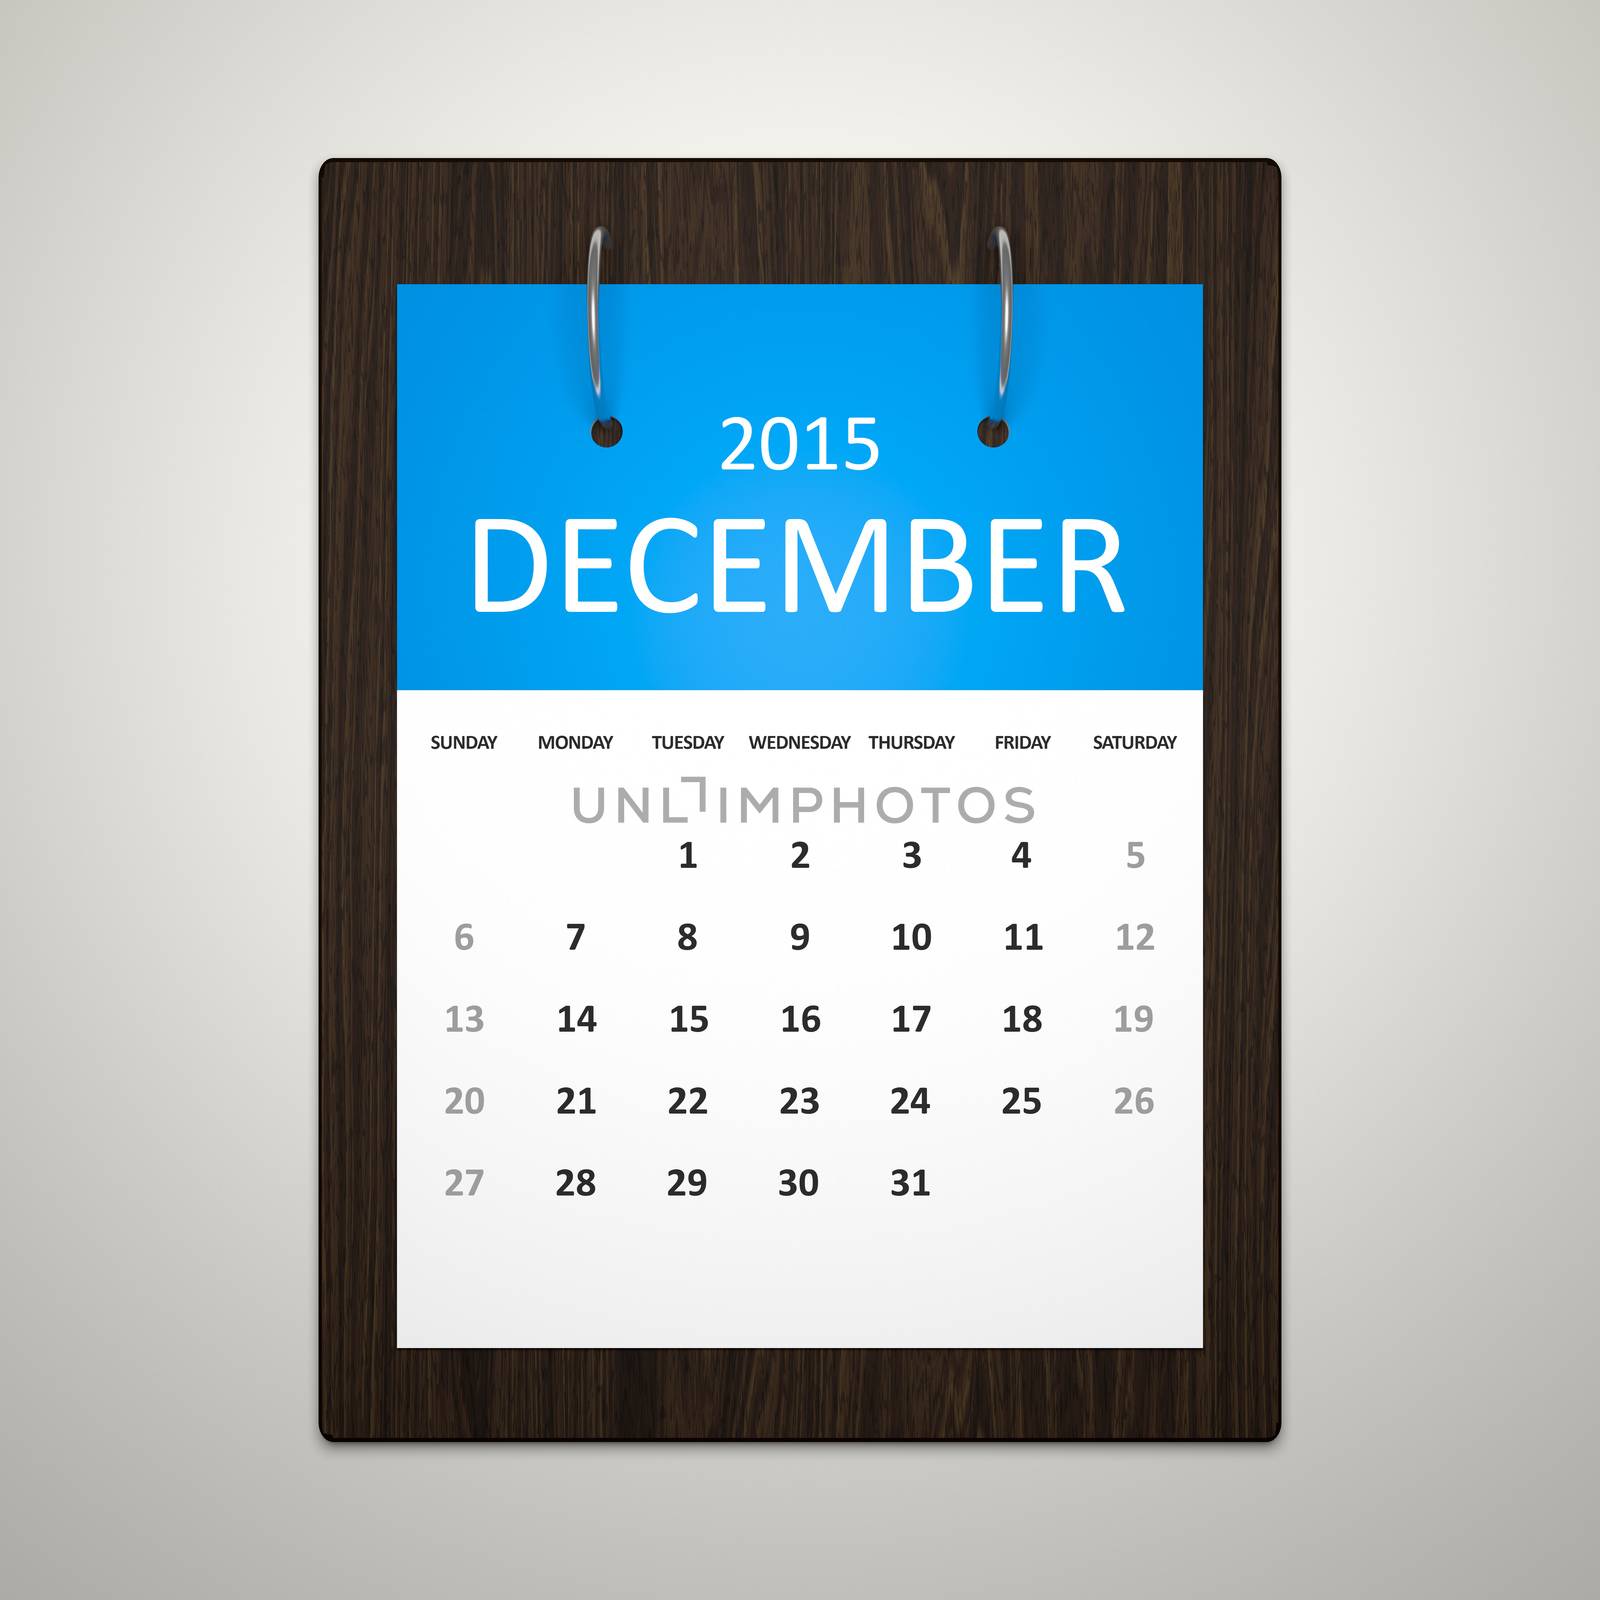 An image of a stylish calendar for event planning December 2015